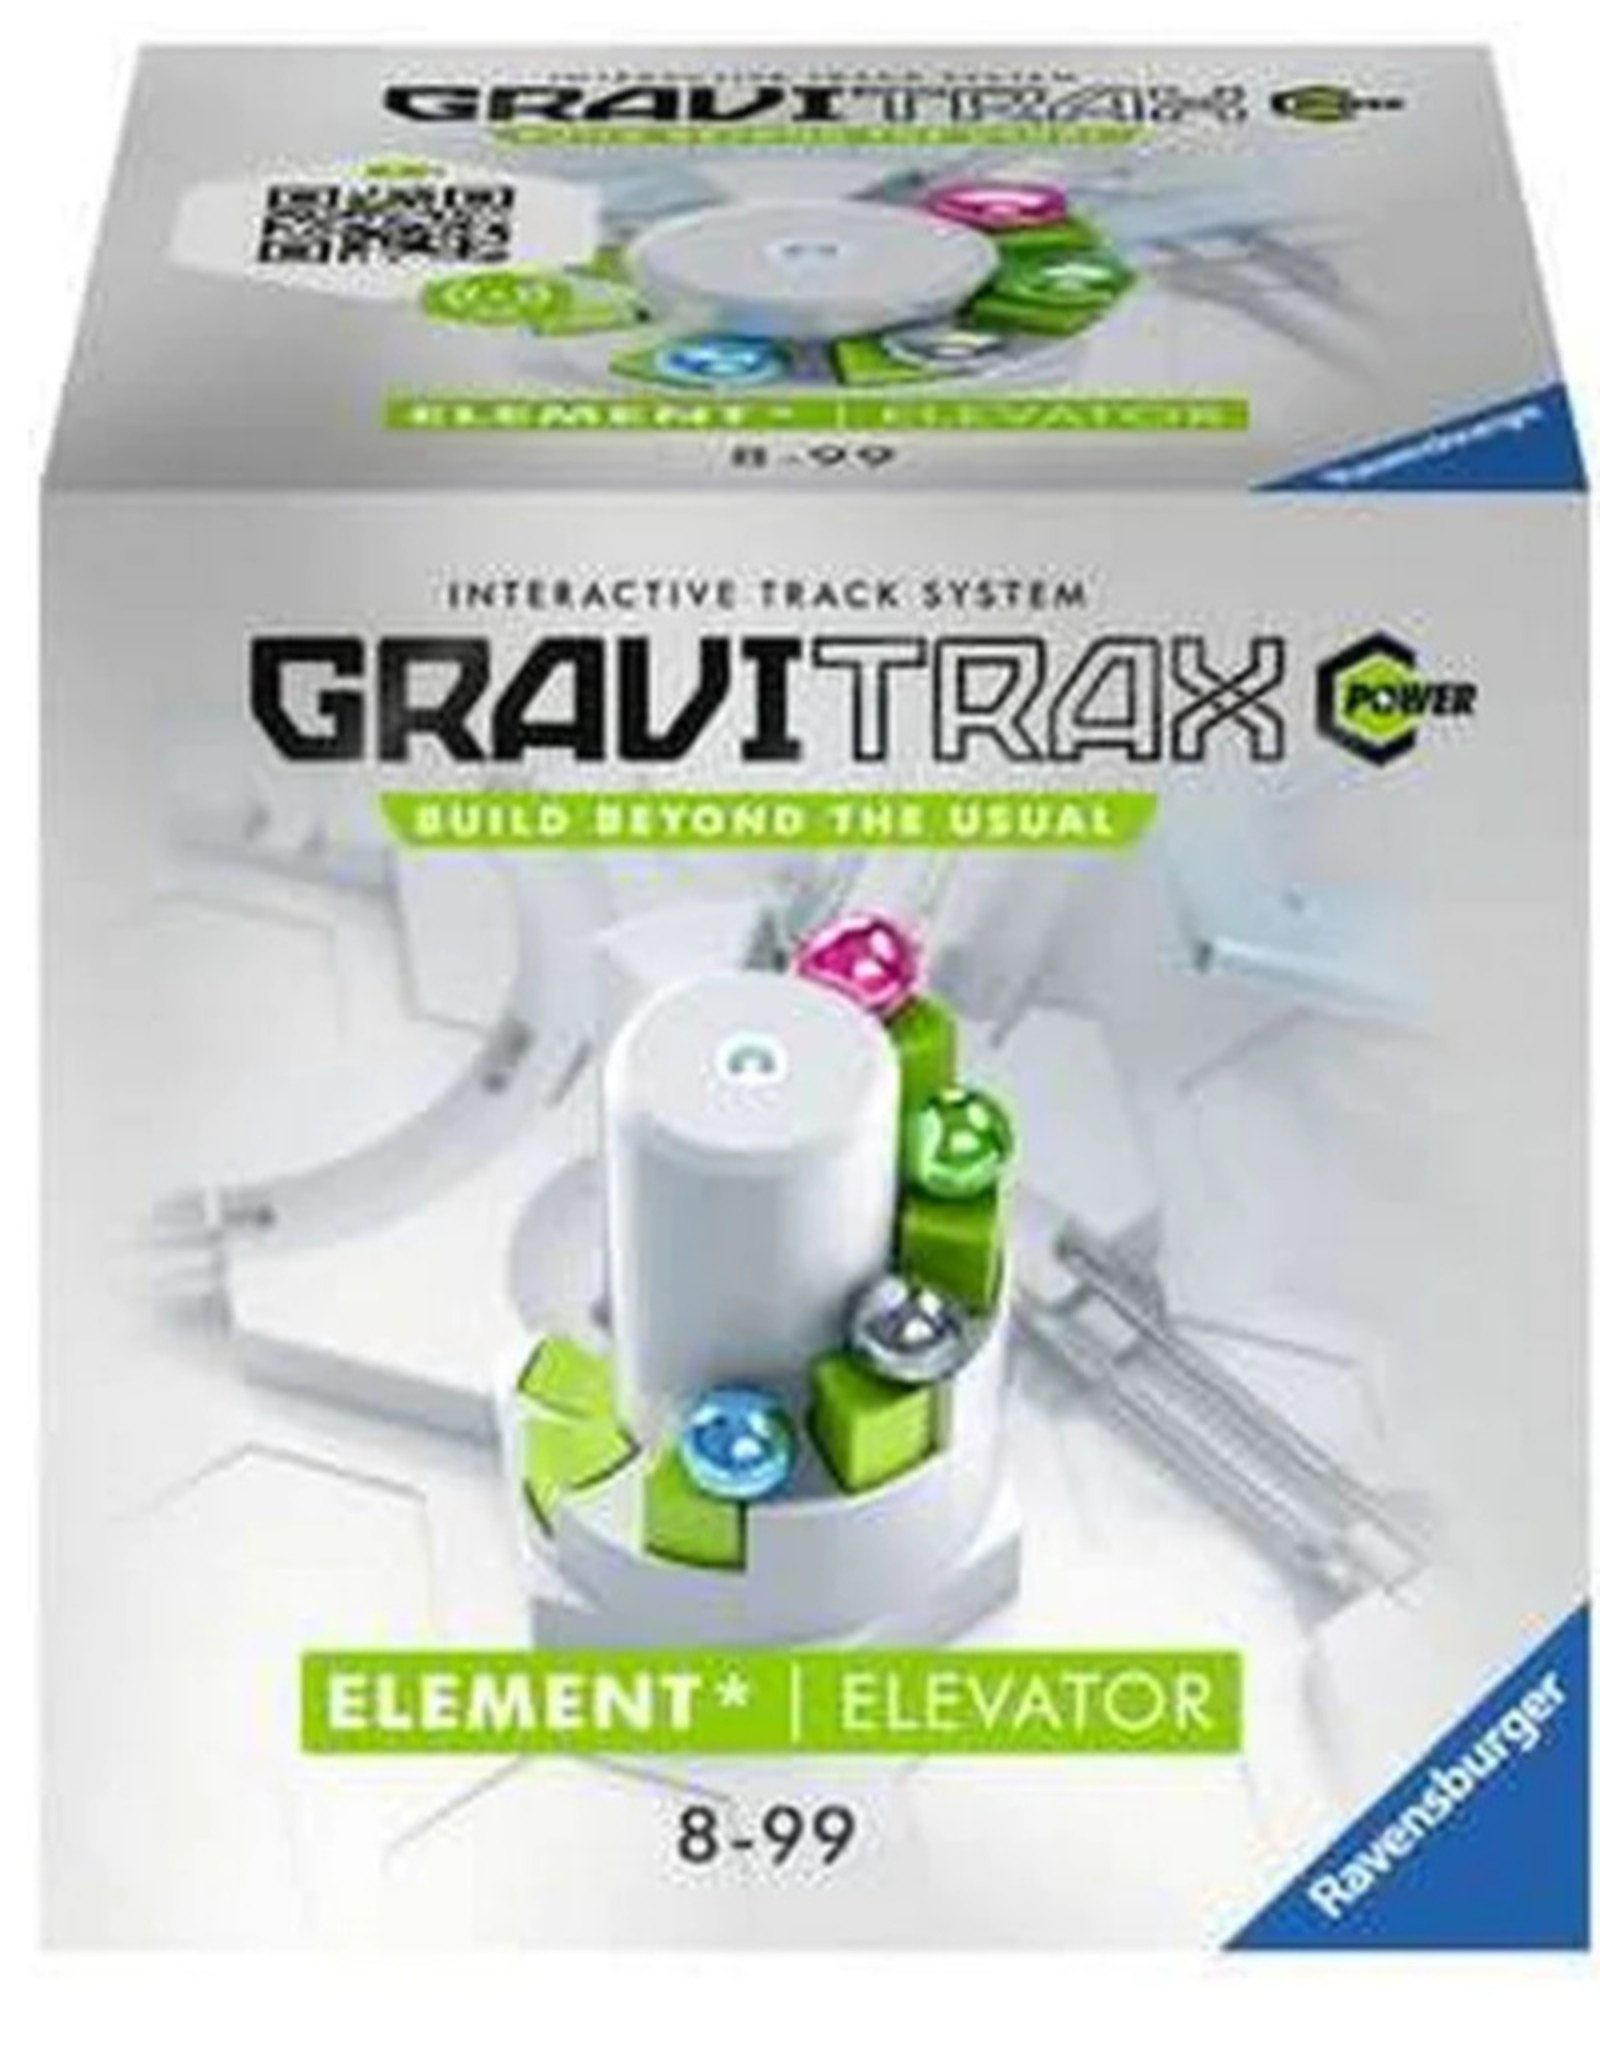 Gravitrax Power Element Elevator - The Swag Sisters Toy Store